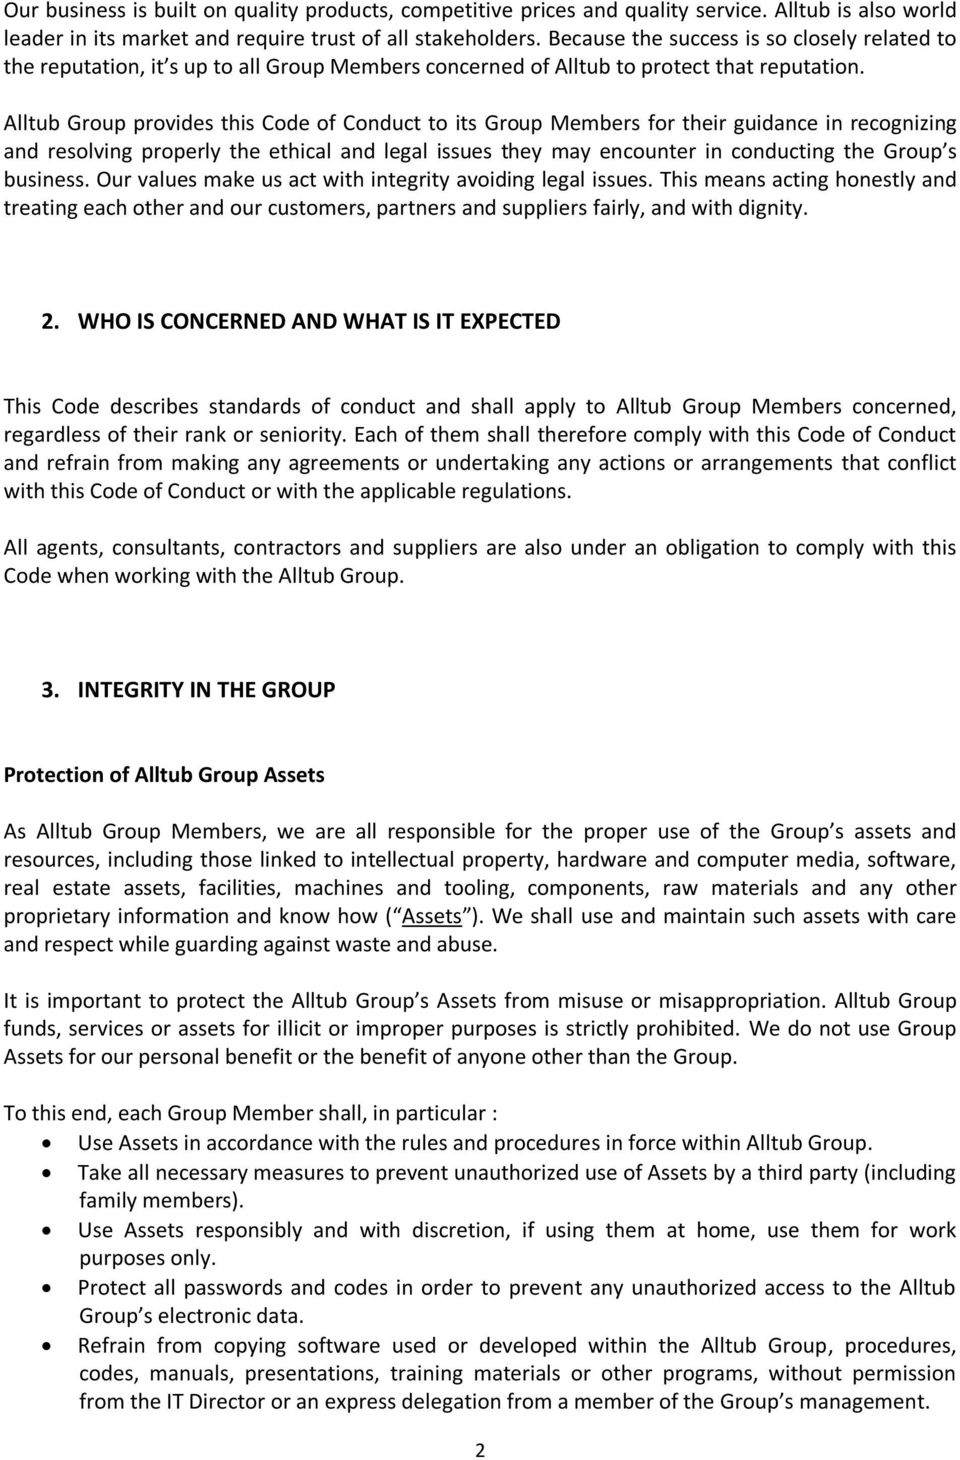 Alltub Group provides this Code of Conduct to its Group Members for their guidance in recognizing and resolving properly the ethical and legal issues they may encounter in conducting the Group s